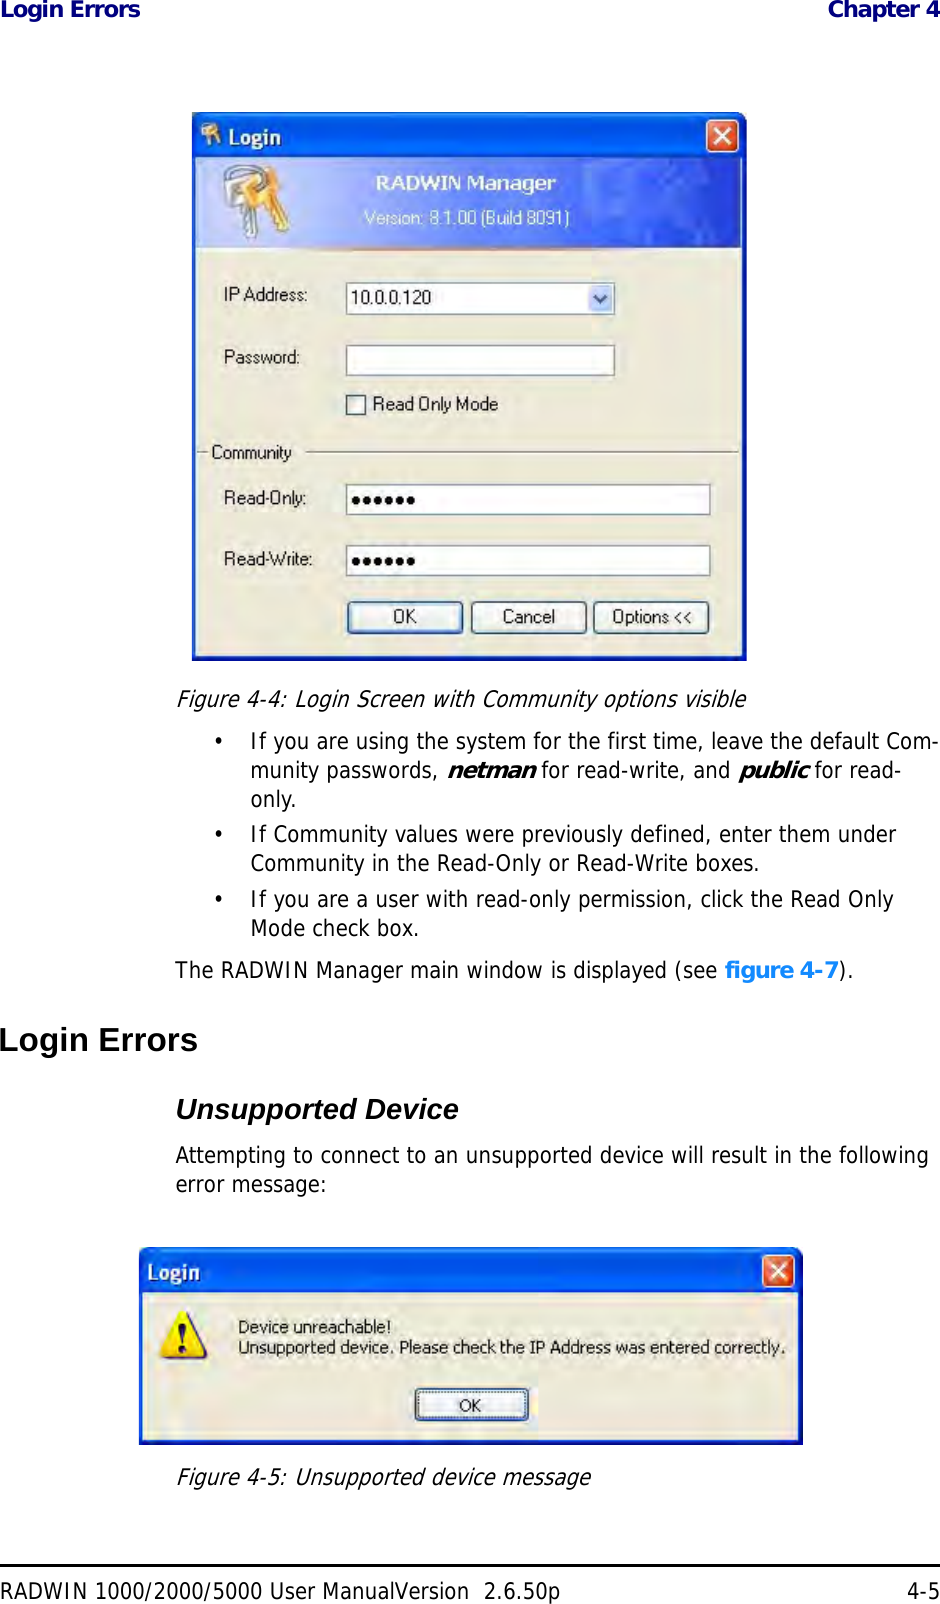 Login Errors  Chapter 4RADWIN 1000/2000/5000 User ManualVersion  2.6.50p 4-5Figure 4-4: Login Screen with Community options visible• If you are using the system for the first time, leave the default Com-munity passwords, netman for read-write, and public for read-only.• If Community values were previously defined, enter them under Community in the Read-Only or Read-Write boxes.• If you are a user with read-only permission, click the Read Only Mode check box.The RADWIN Manager main window is displayed (see figure 4-7).Login ErrorsUnsupported DeviceAttempting to connect to an unsupported device will result in the following error message:Figure 4-5: Unsupported device message